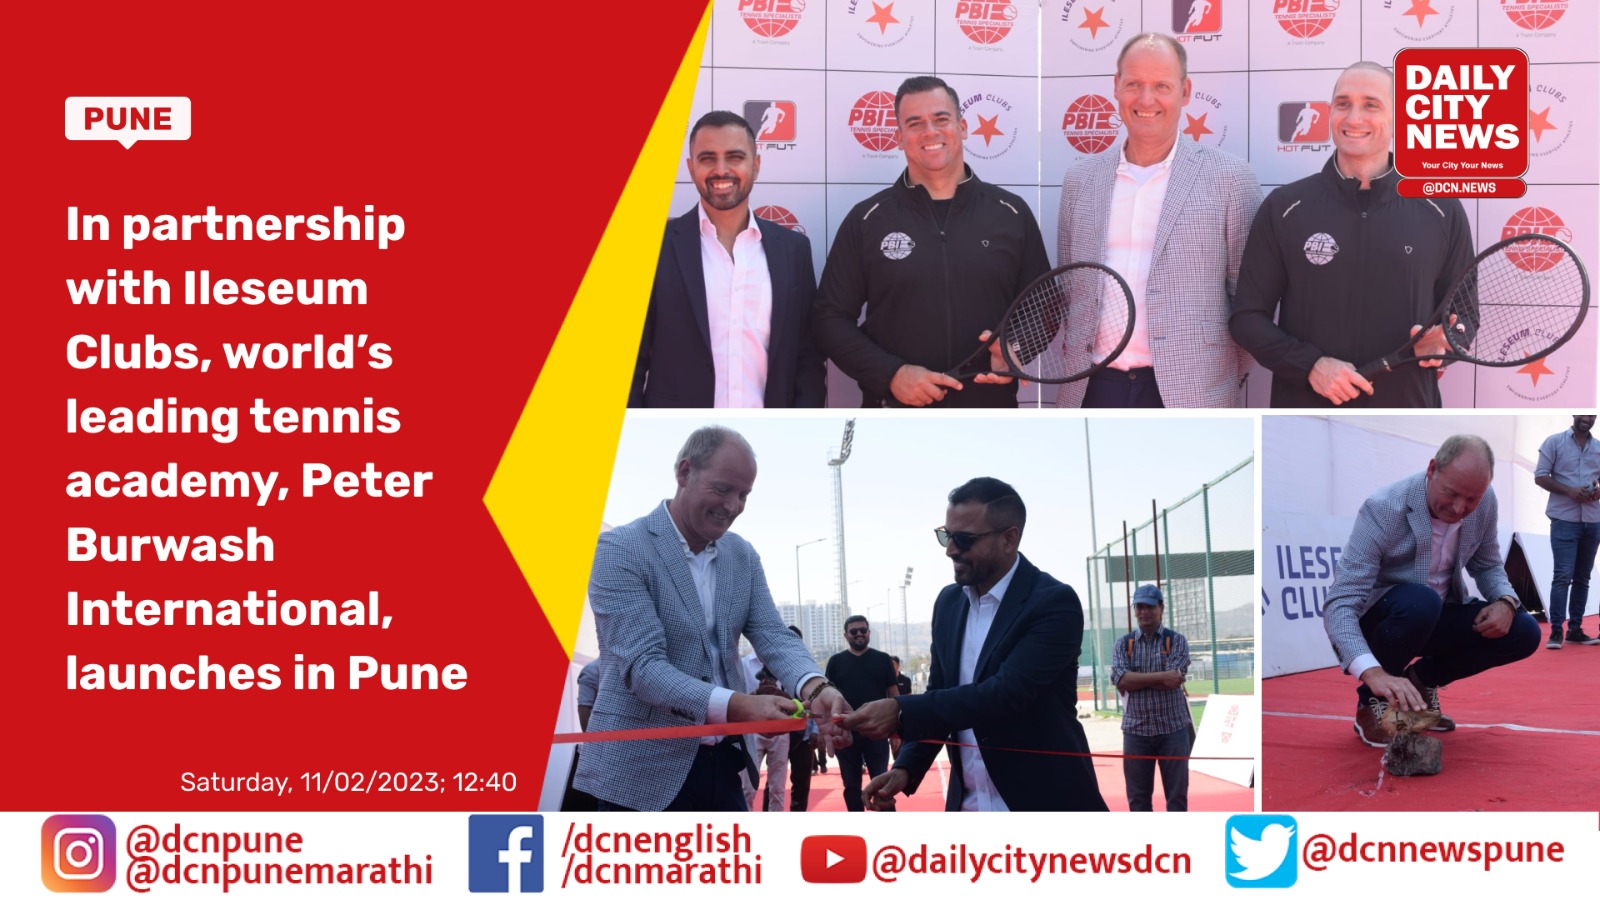 In partnership with Ileseum Clubs, world’s leading tennis academy, Peter Burwash International, launches in Pune